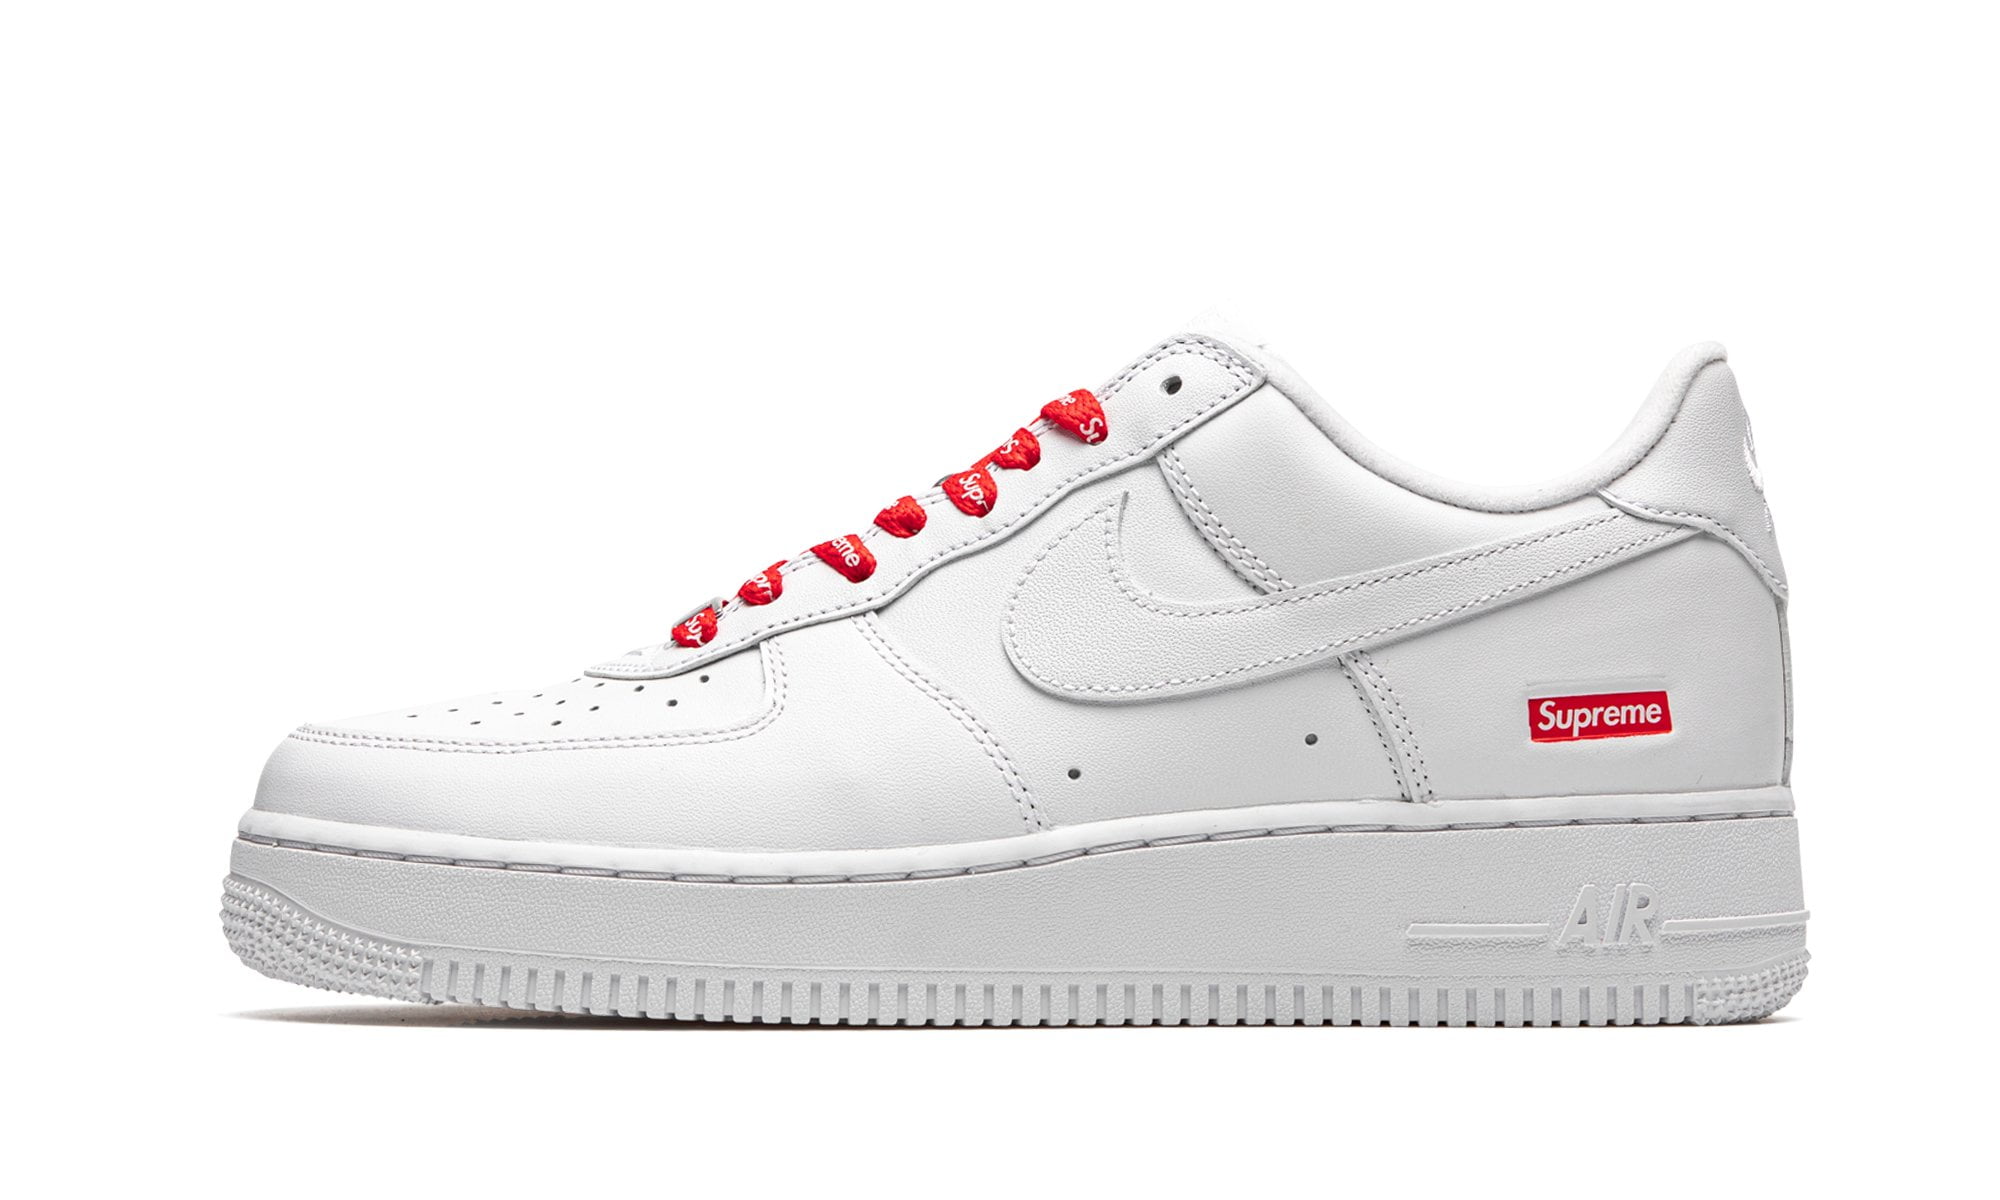 supreme air force 1 in store